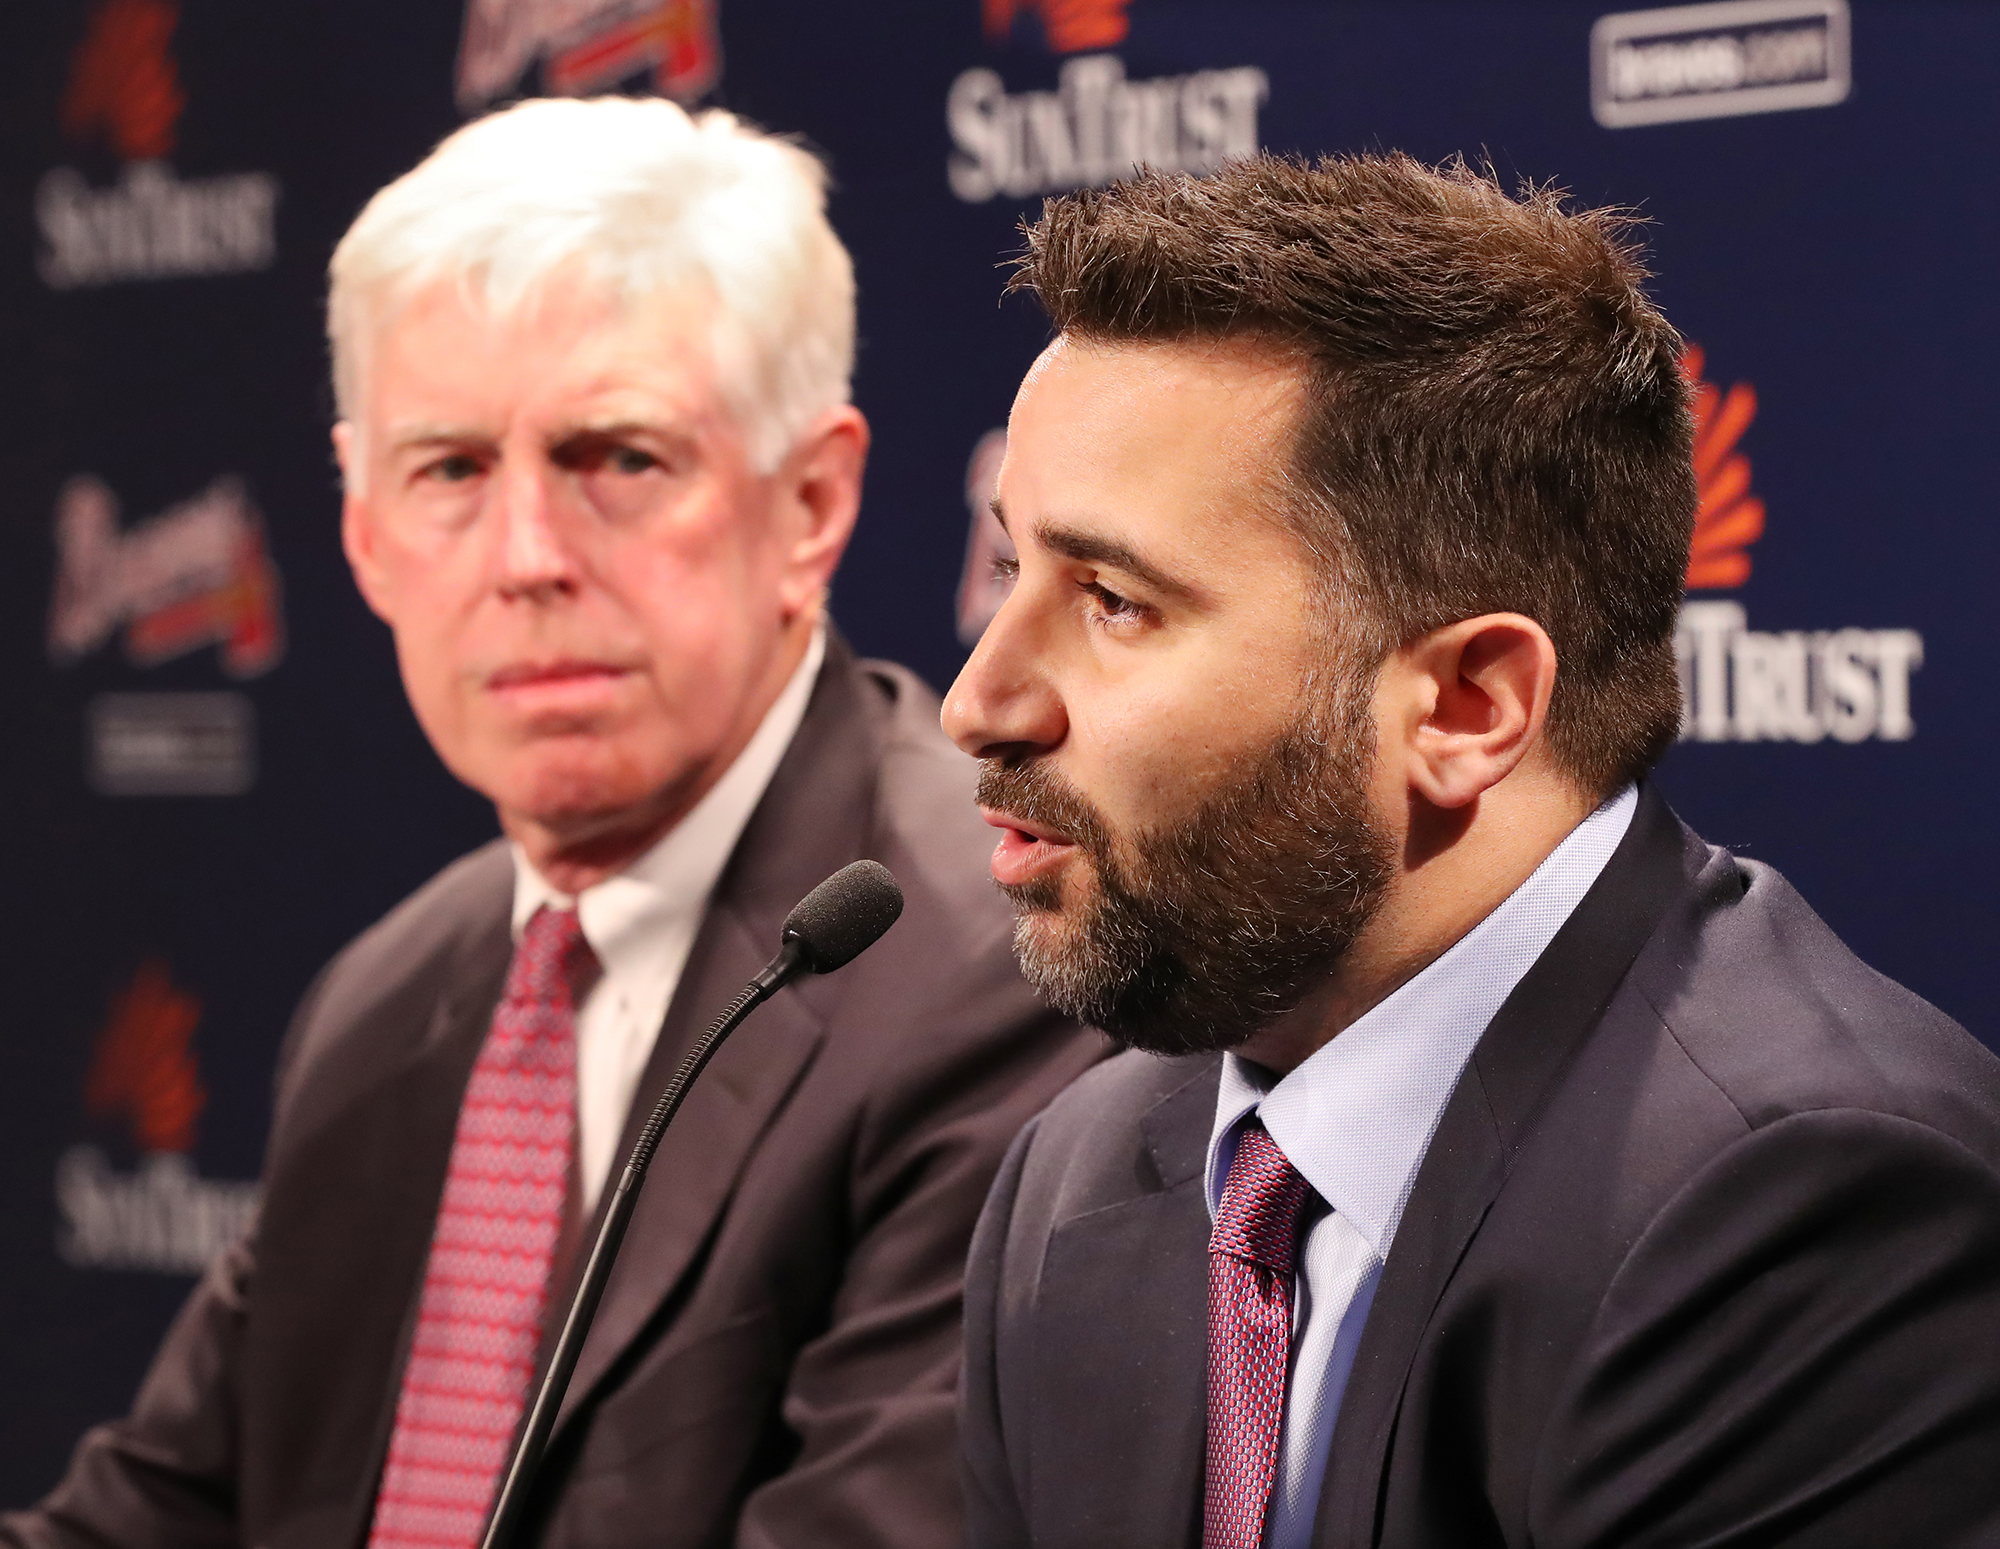 Breaking Down Alex Anthopoulos' Career and Every Move - Battery Power